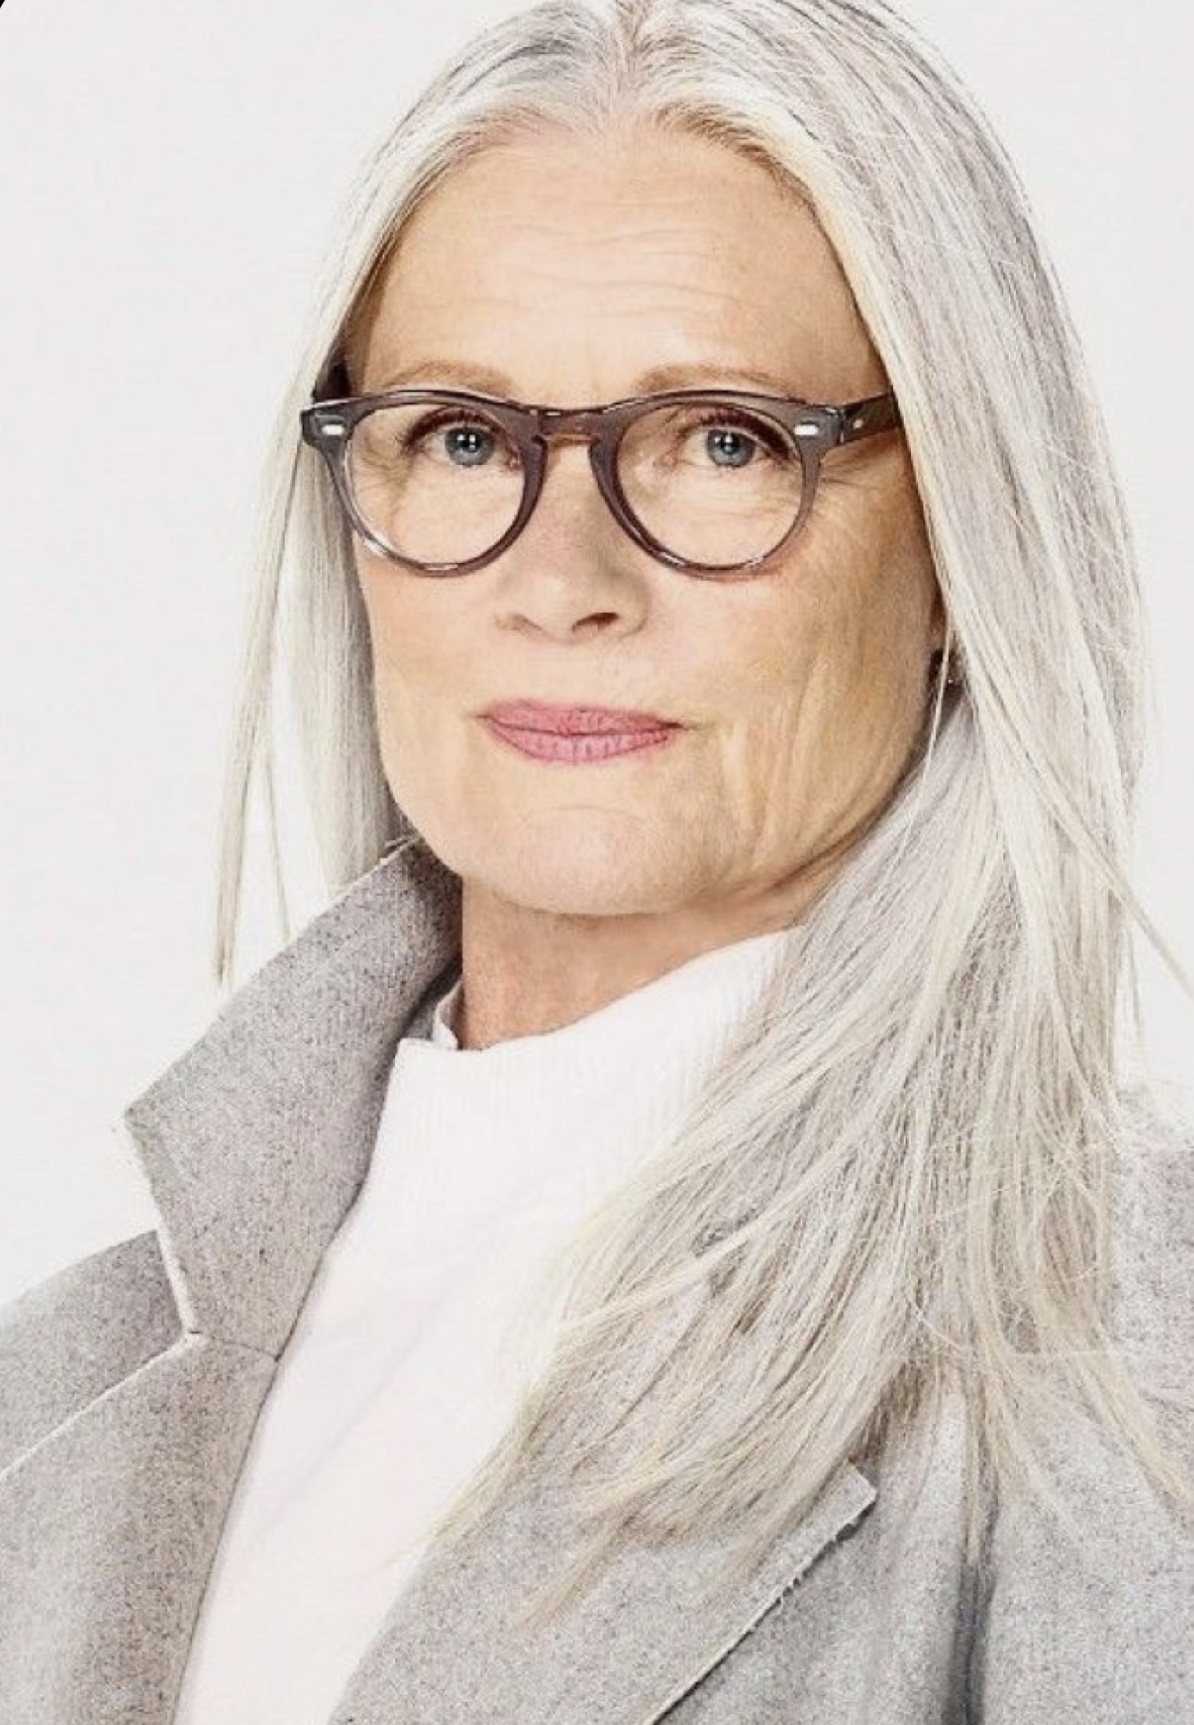 Medium Length Hairstyles For Over 60 With Glasses